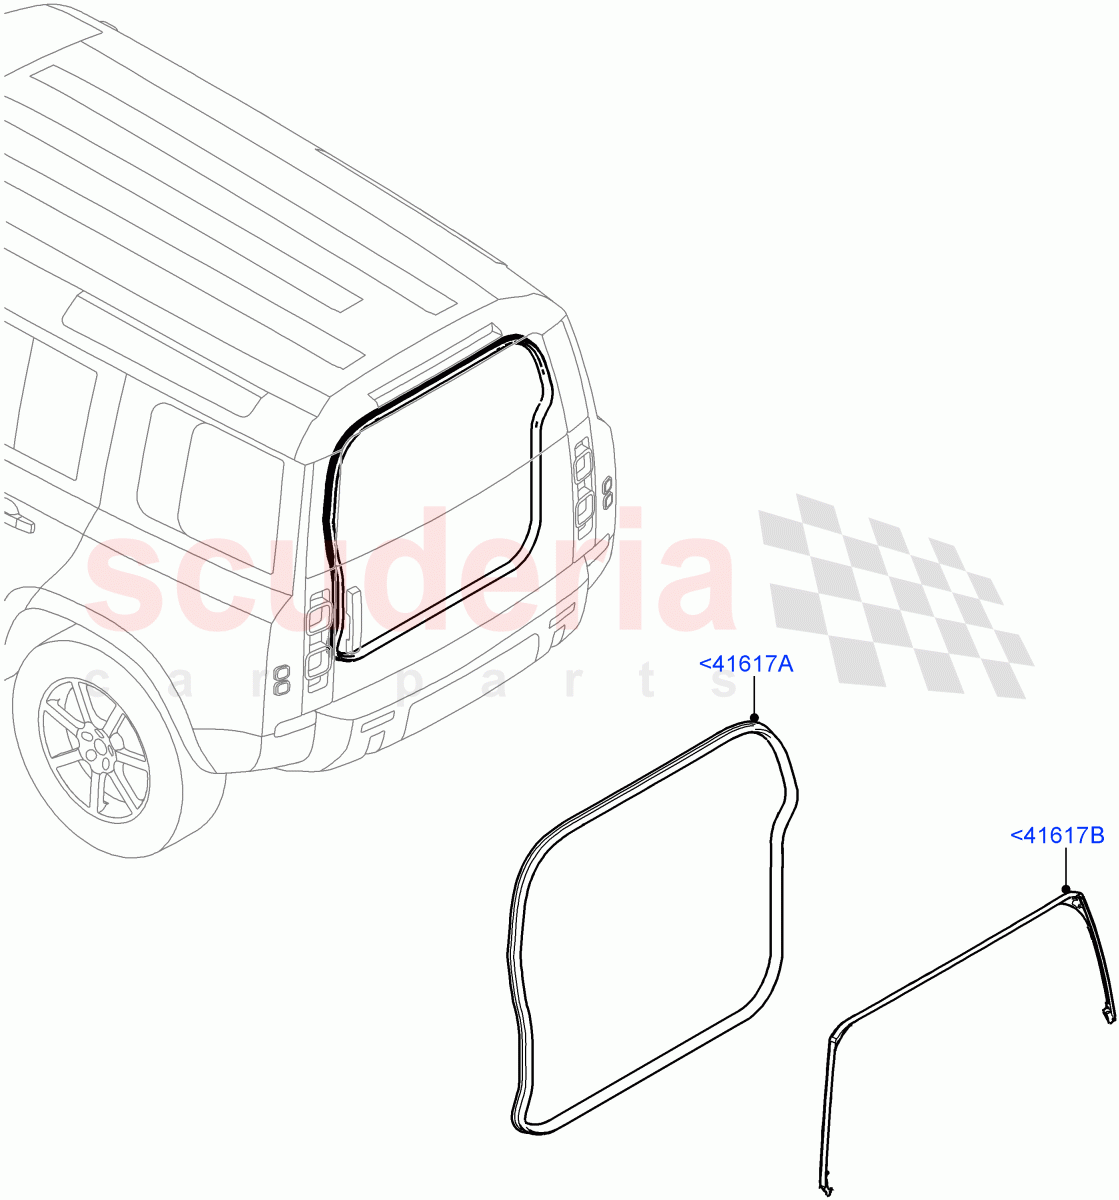 Luggage Compartment Door(Weatherstrips And Seals) of Land Rover Land Rover Defender (2020+) [2.0 Turbo Diesel]